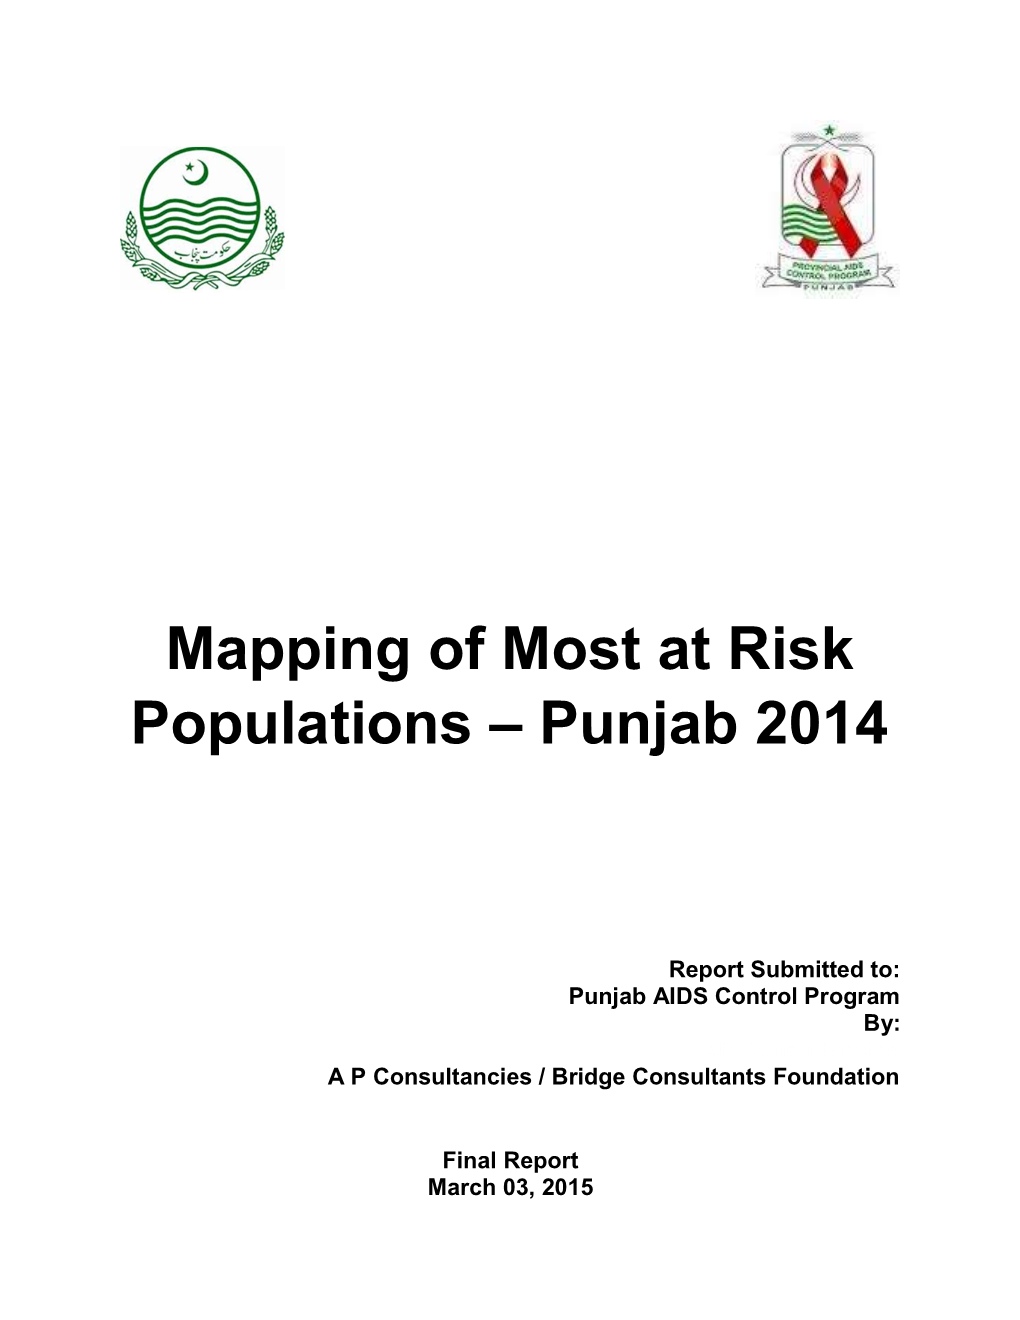 Mapping of Most at Risk Populations – Punjab 2014